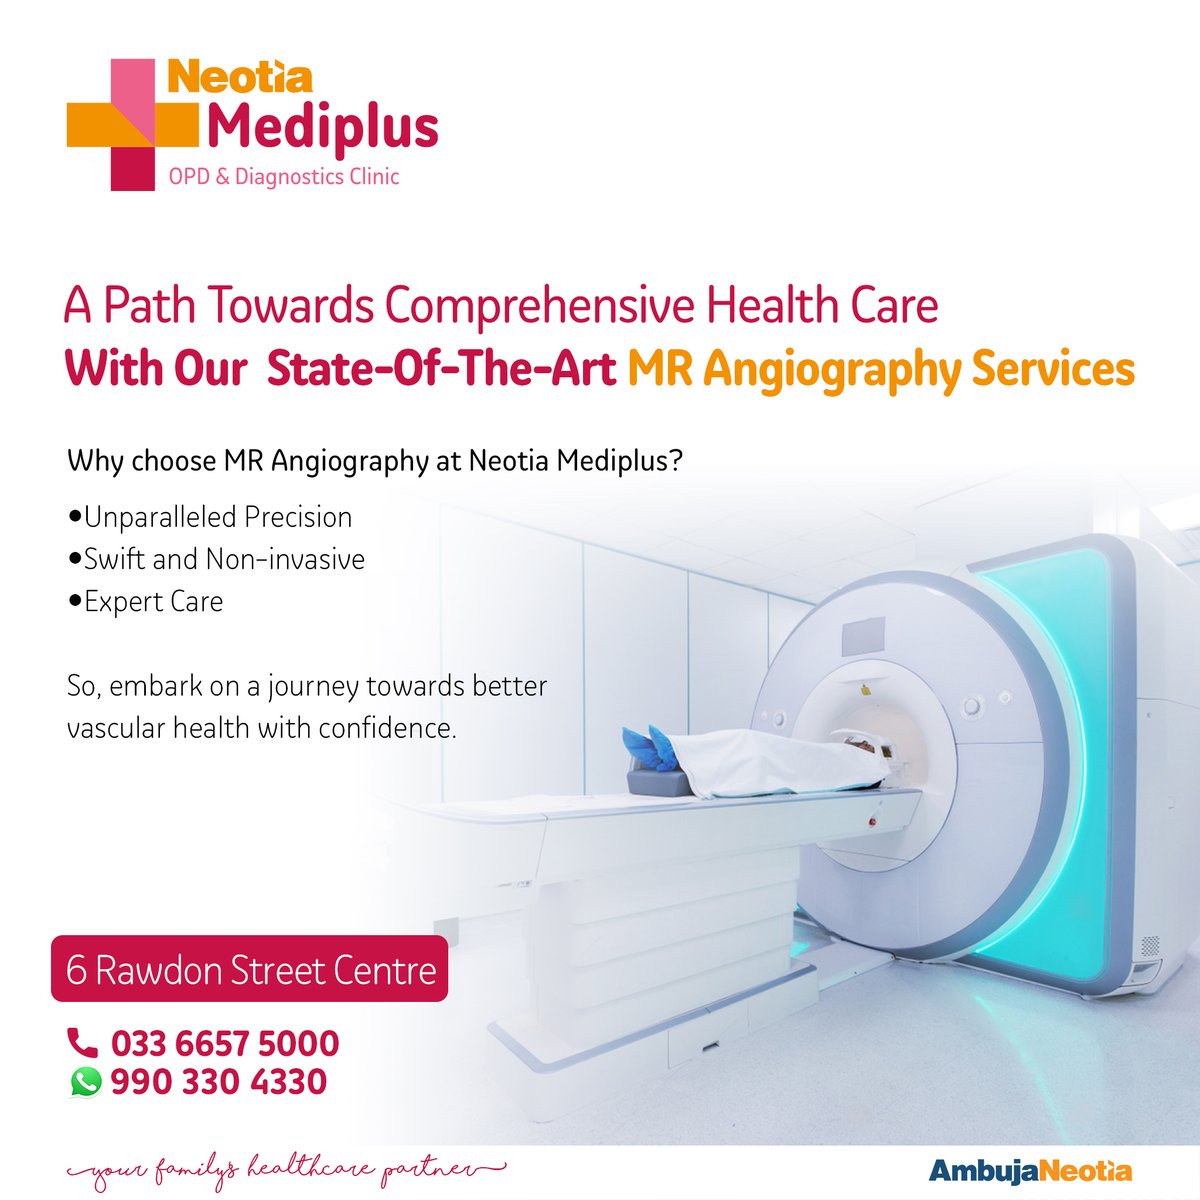 Unlock Precision with MR Angiography! Our scans offer 95% accuracy, spotting vascular issues early. Experiencing symptoms? Book now for personalised care. Trust Neotia Mediplus for a healthier you! #MRangiography #VascularHealth #AmbujaNeotia #PersonalisedCare #NeotiaMediplus